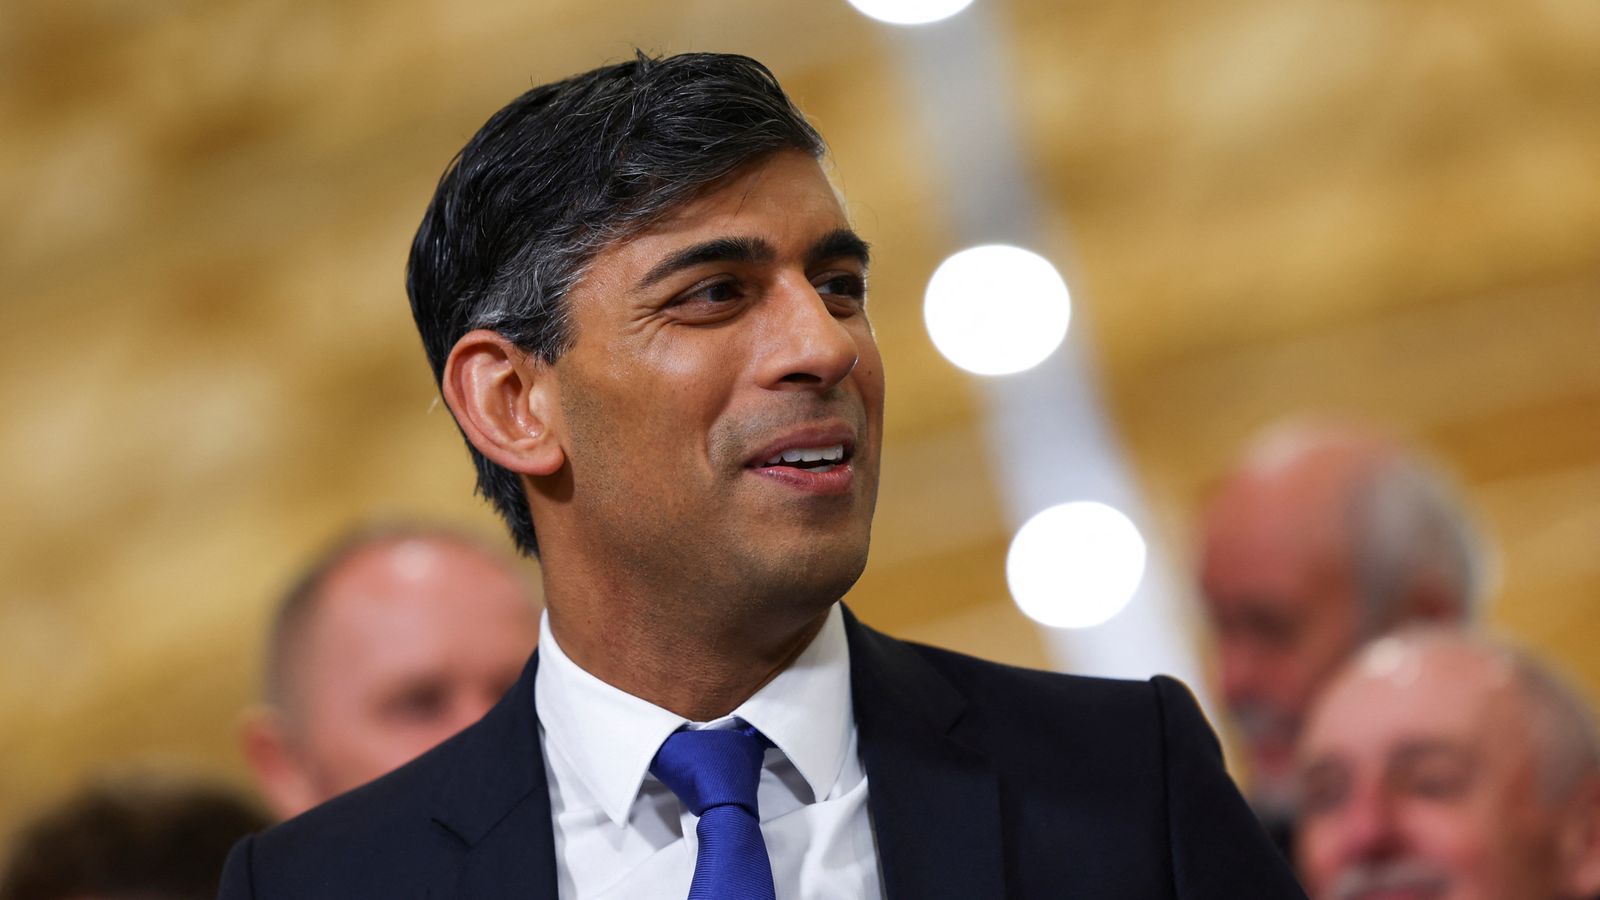 Rishi Sunak admits Tories may not win general election and claims UK heading for hung parliament | Politics News